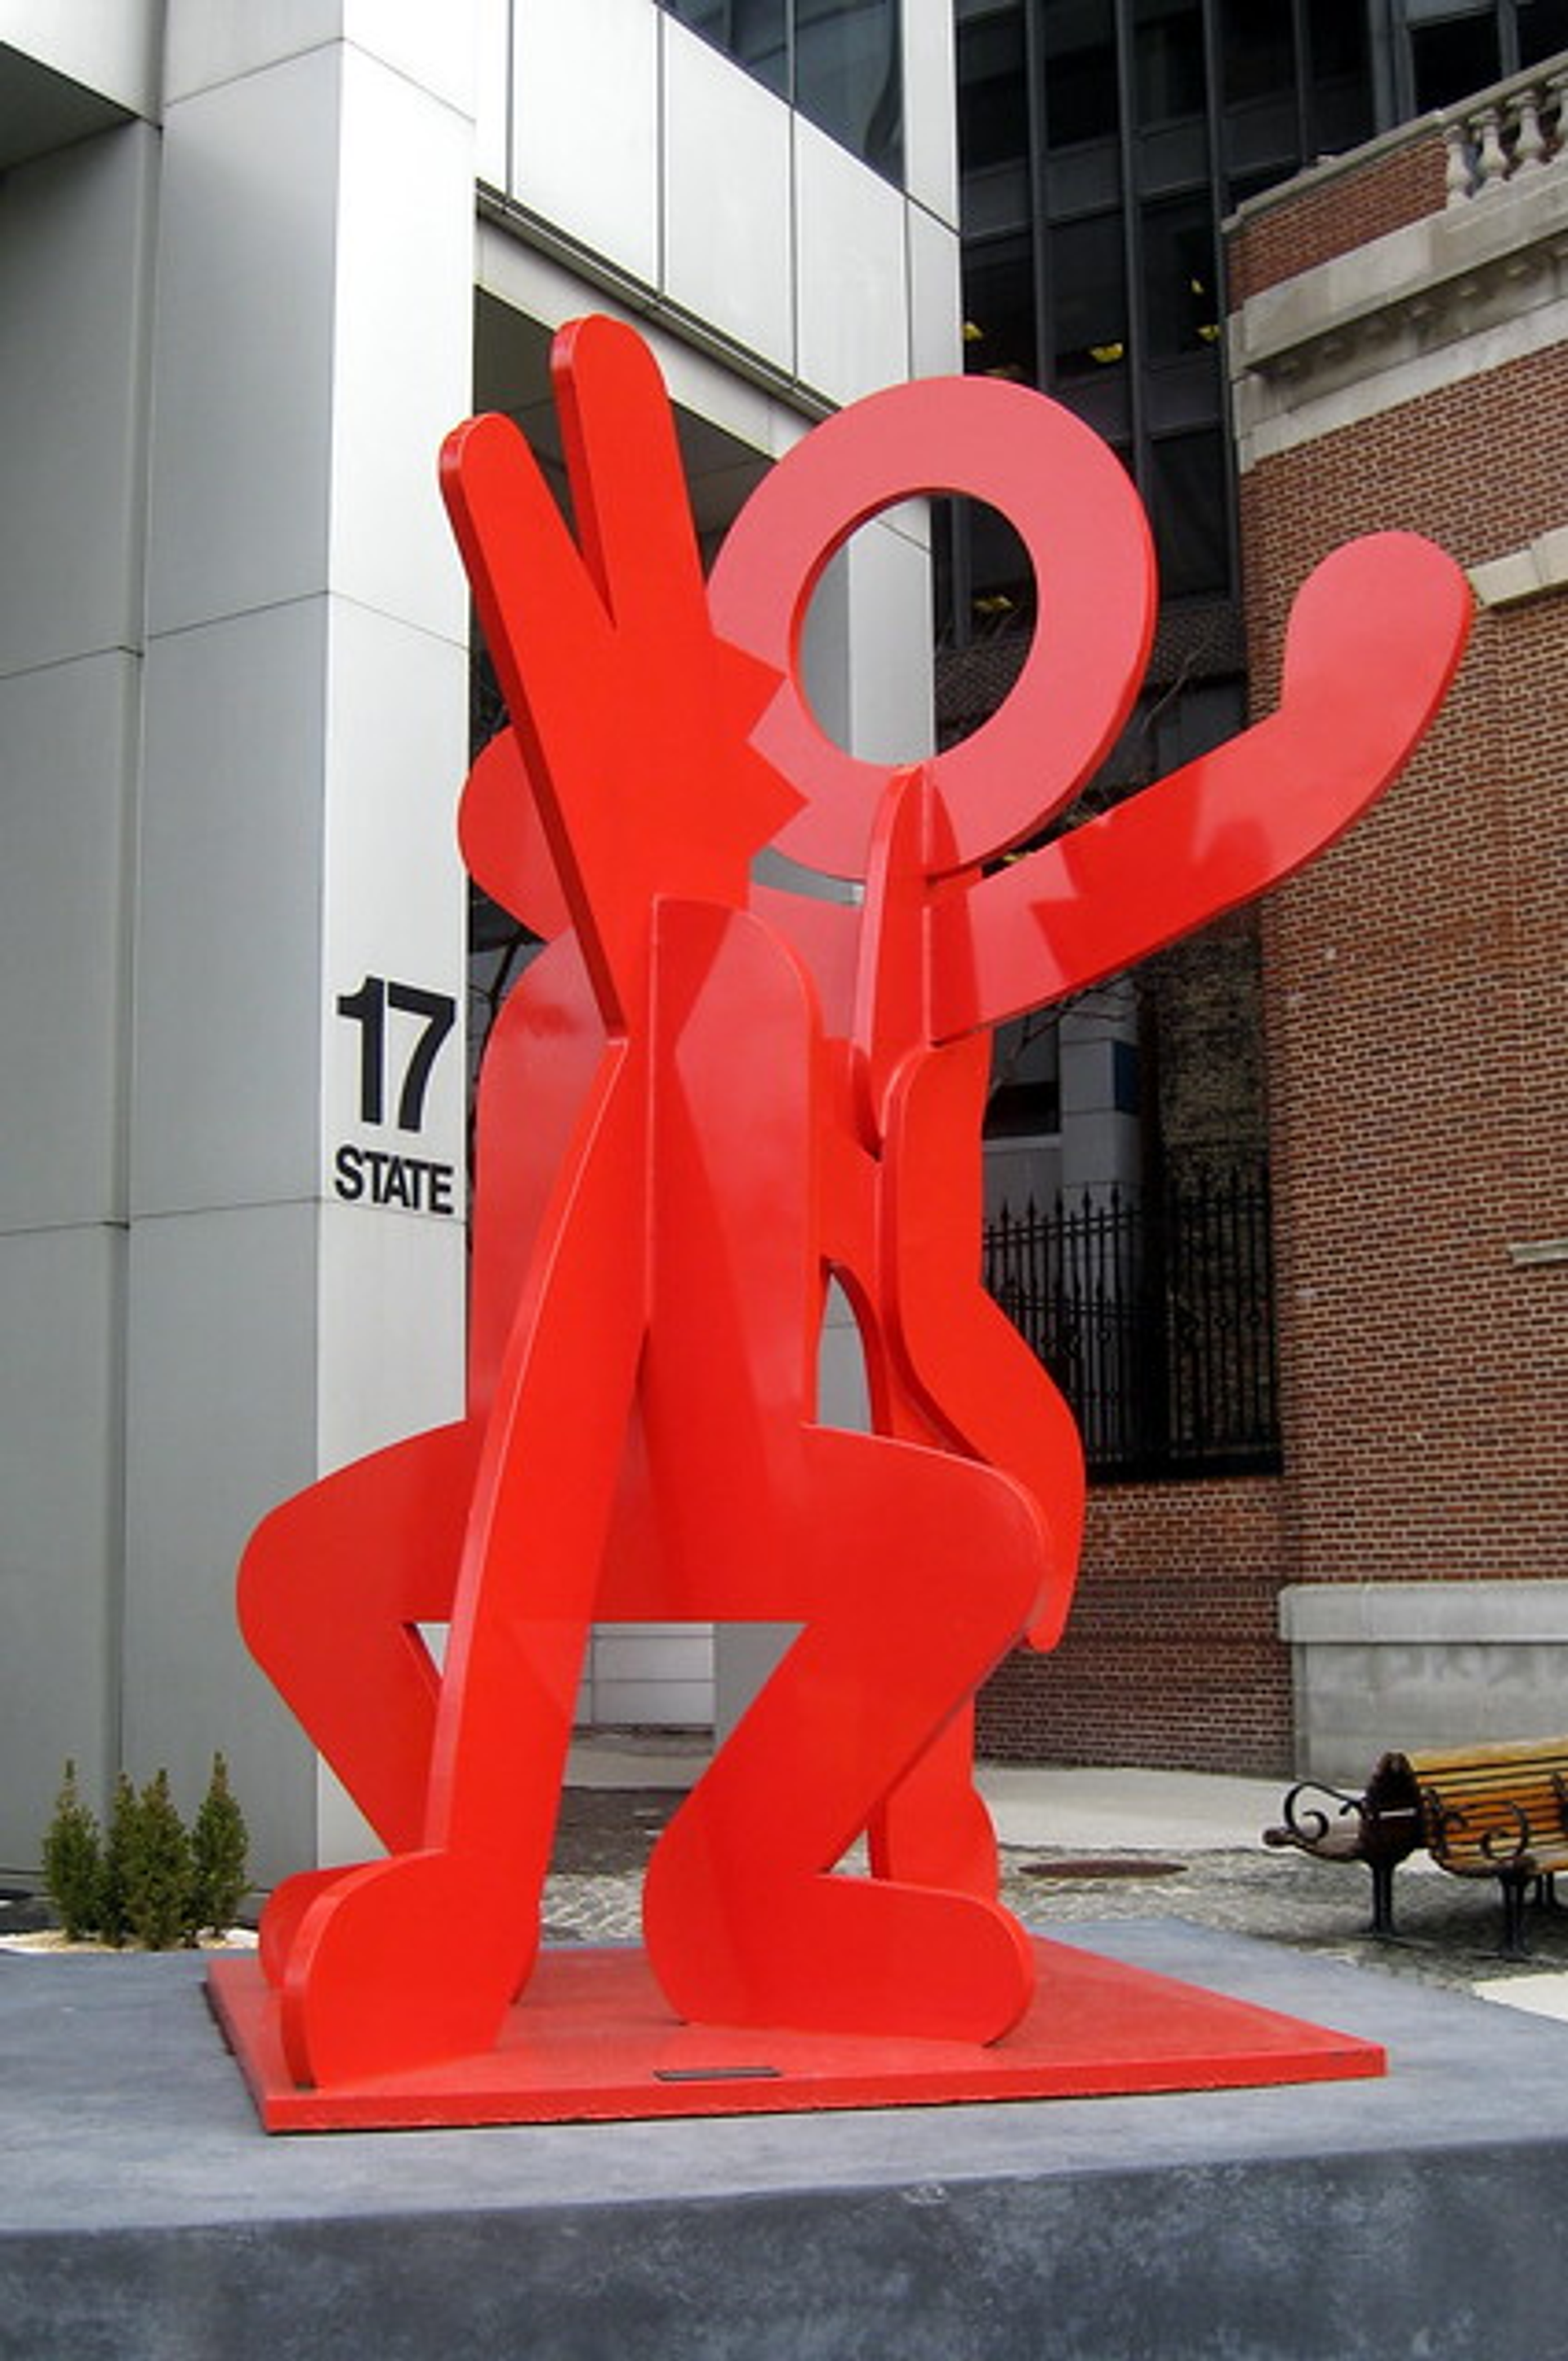 Beyond Pop Art: Exploring Keith Haring’s Lesser-Known Sculptural Works